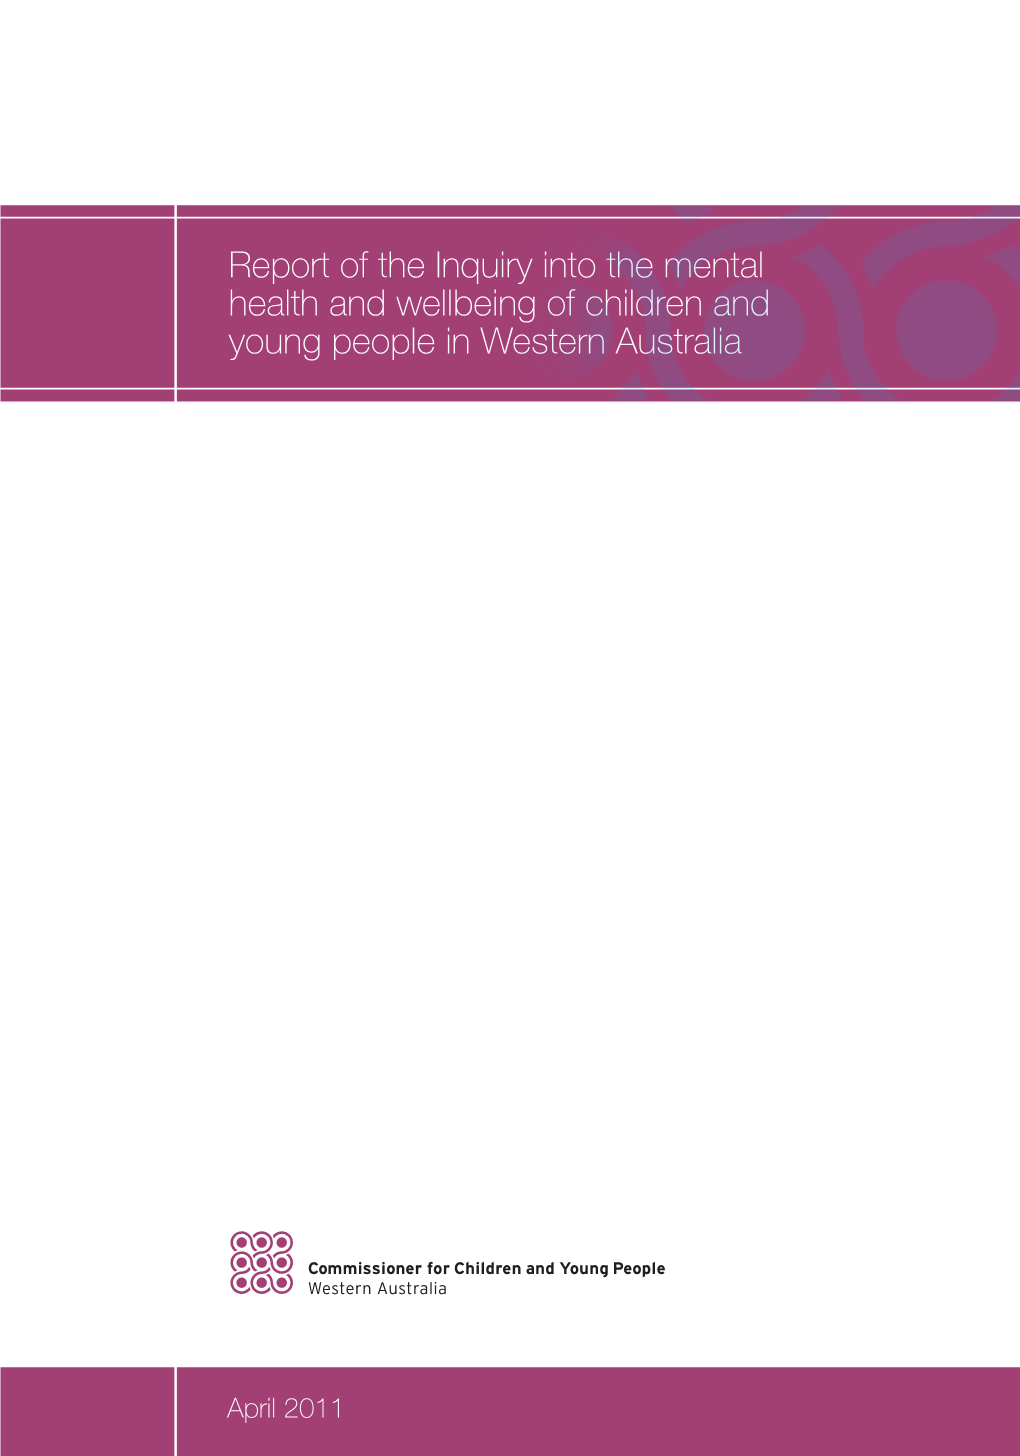 Report of the Inquiry Into the Mental Health and Wellbeing of Children and Young People in Western Australia